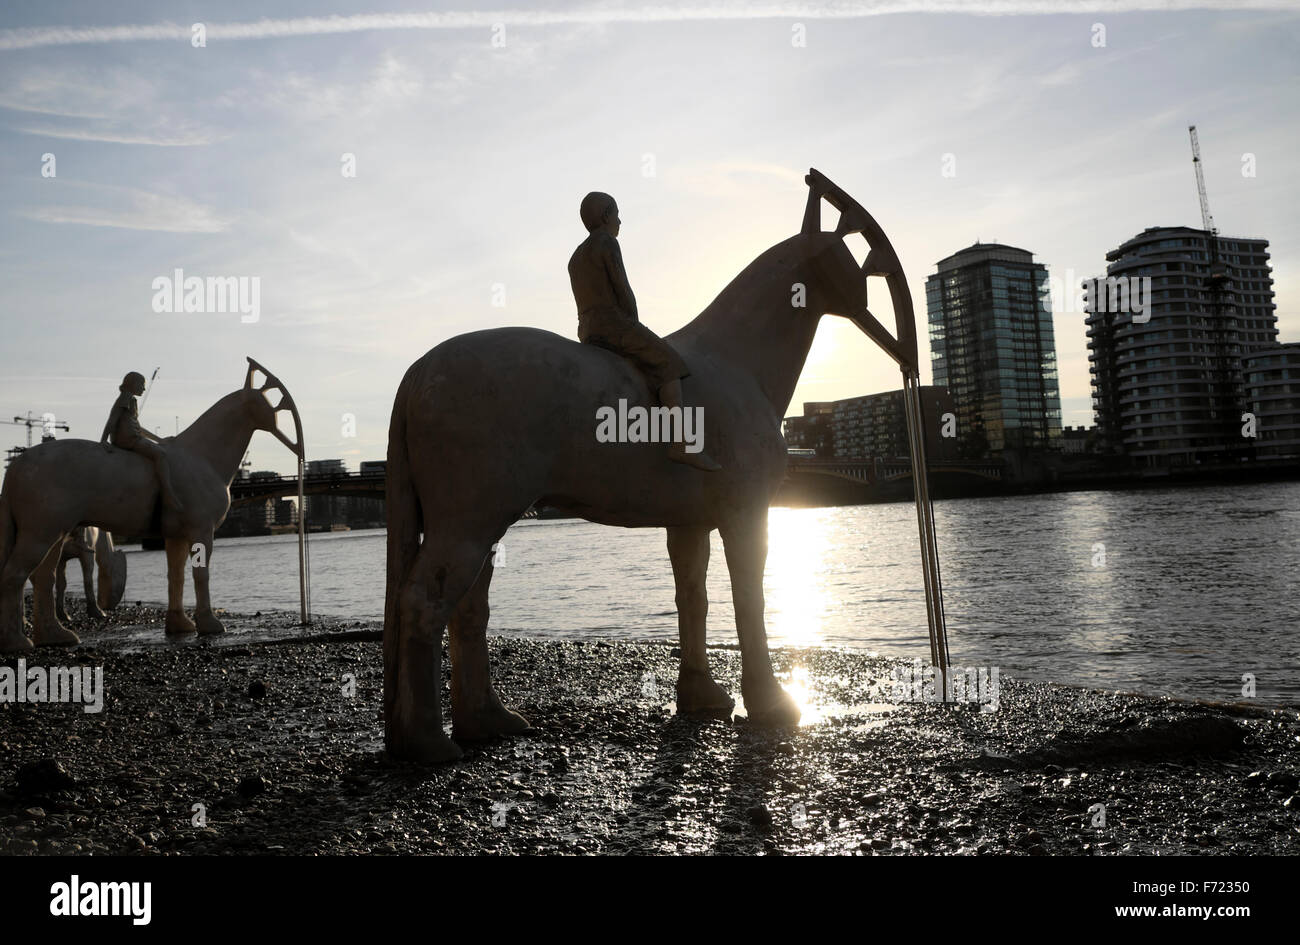 British artist Jason deCaires Taylor horses sculpture 'The Rising Tide'  at low tide on  the Rver Thames London UK 2015   KATHY DEWITT Stock Photo